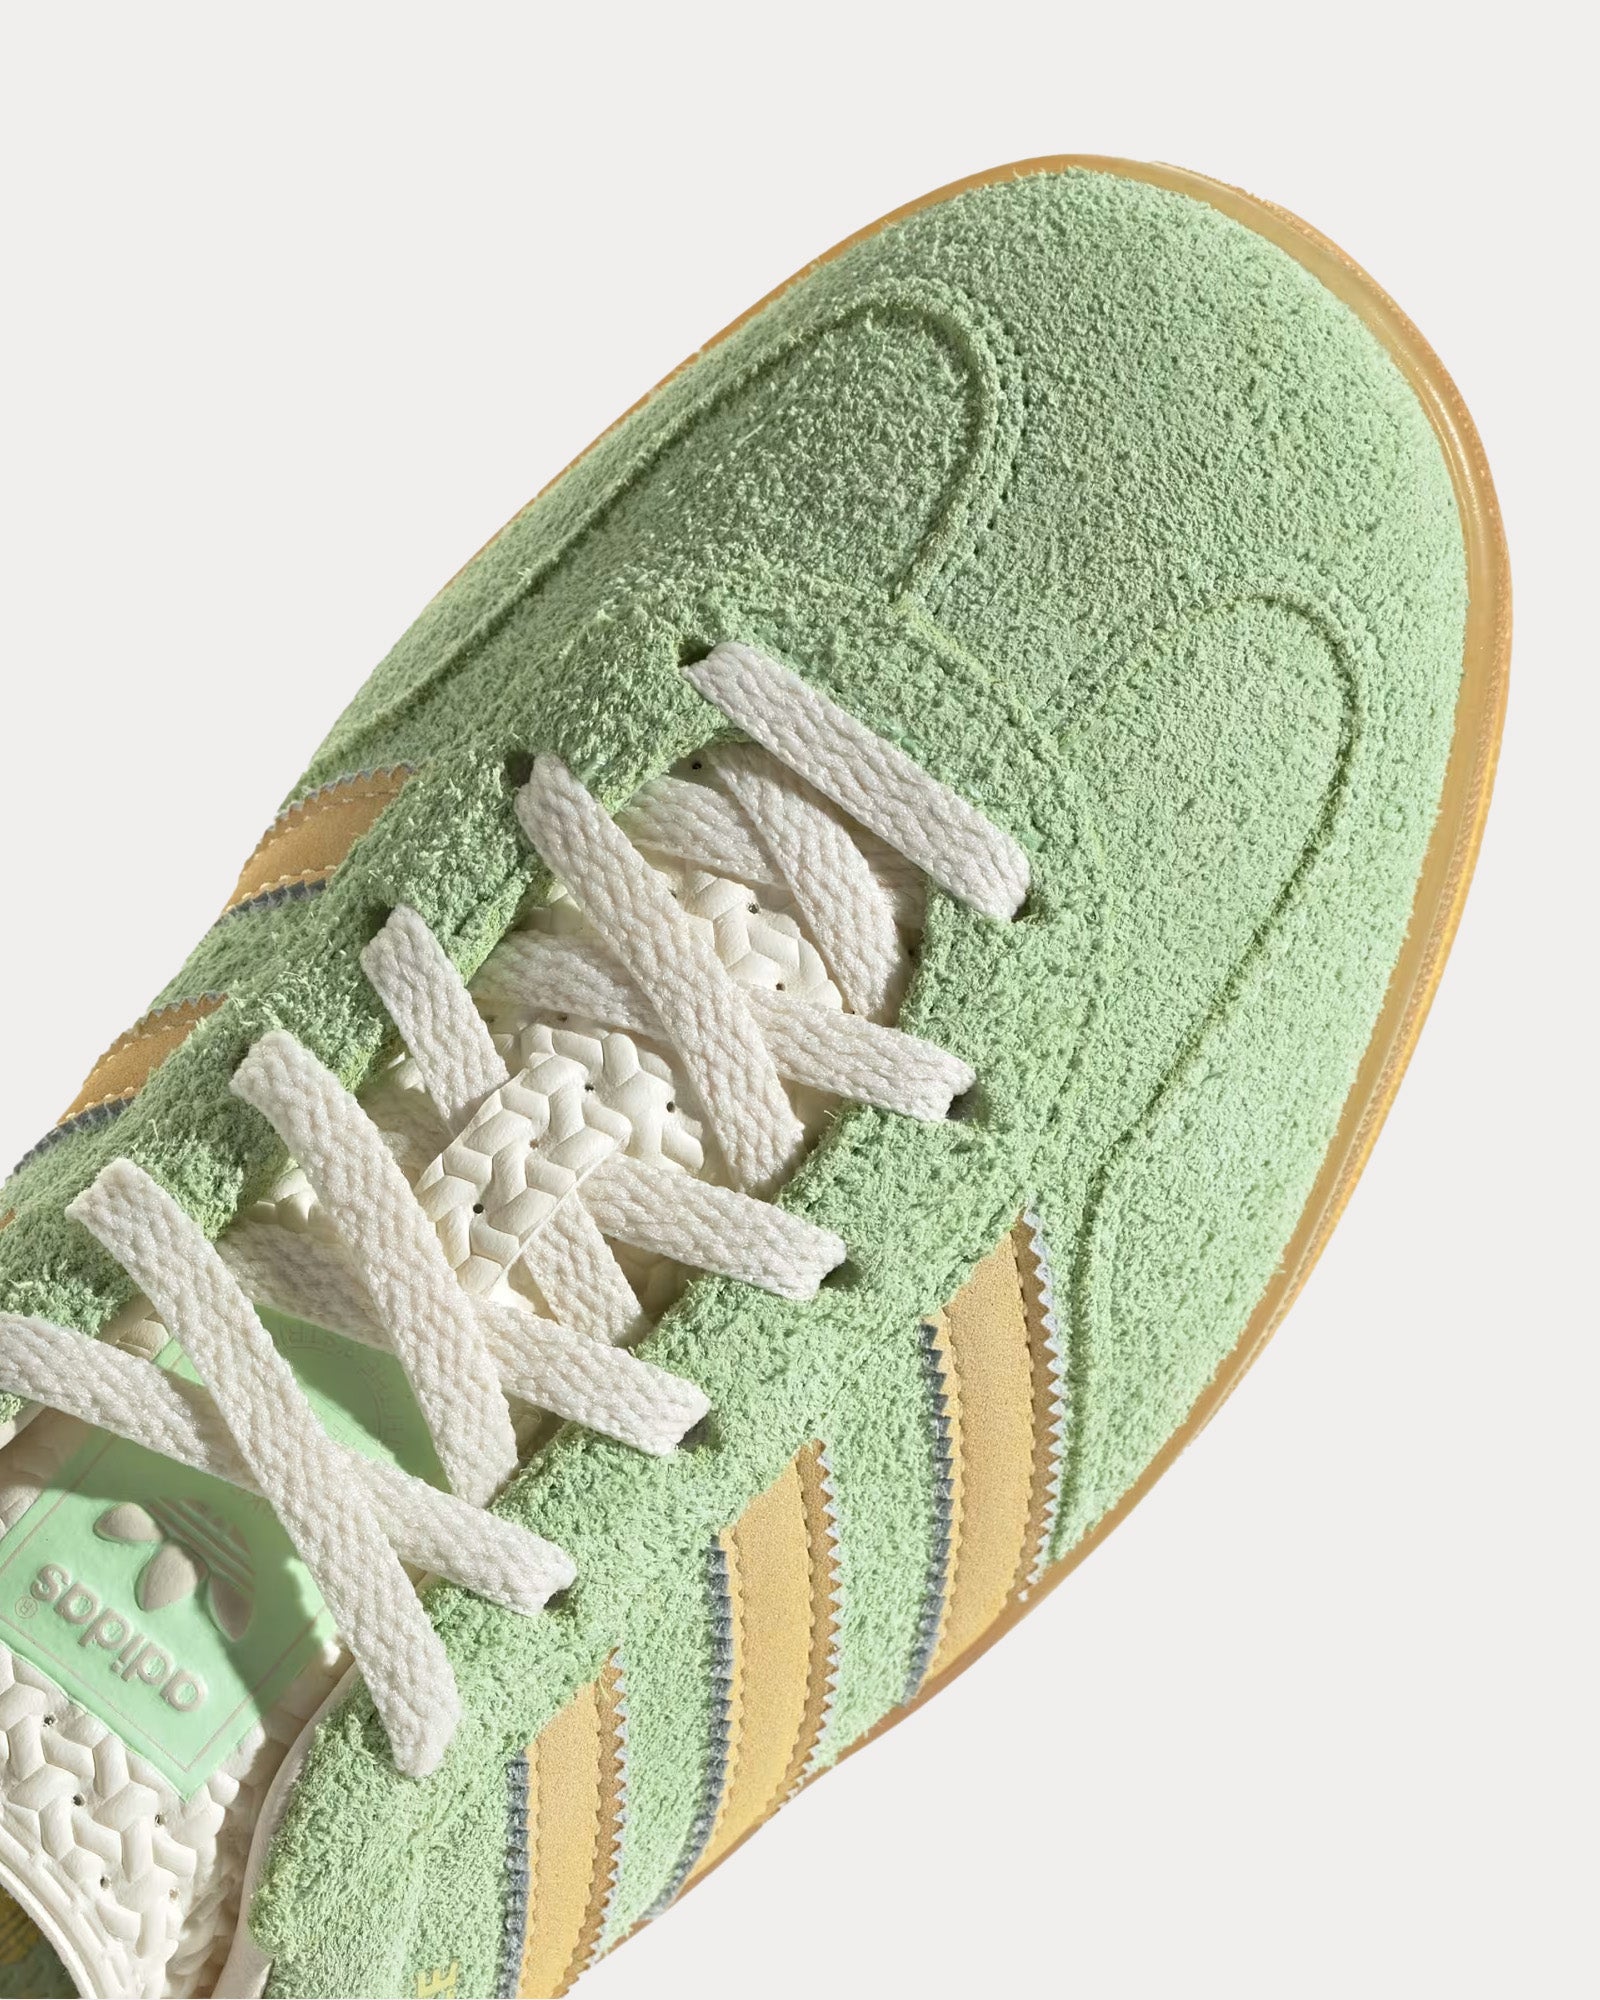 Adidas - Gazelle Indoor Semi Green Spark / Almost Yellow / Cream White Low Top Sneakers